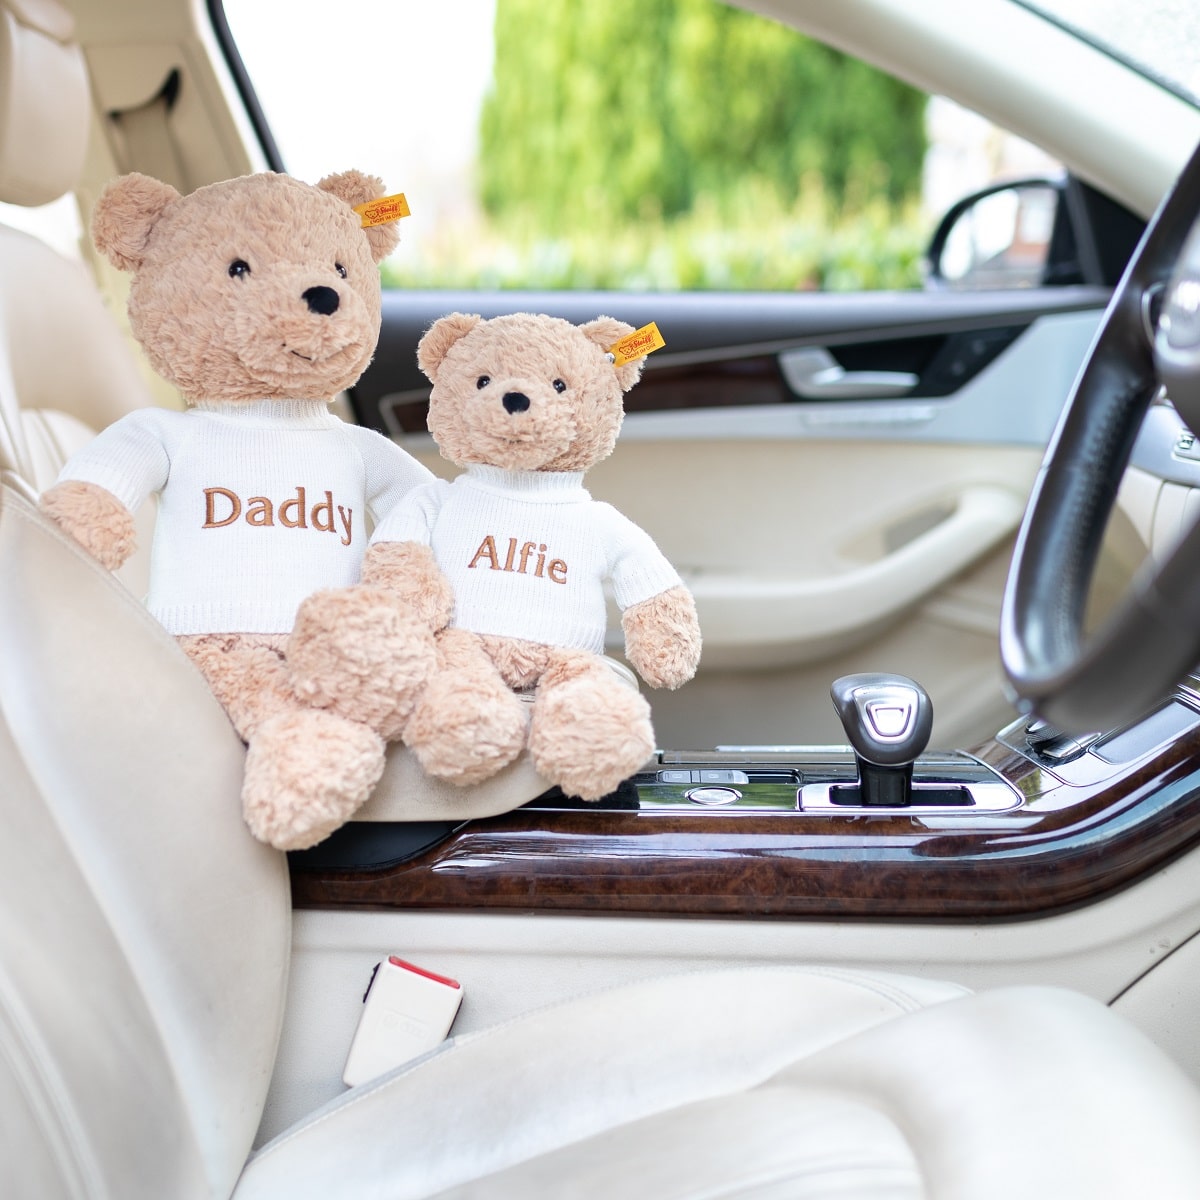 Father’s Day ‘Daddy’ Steiff Jimmy teddy bear large soft toy personalised father's day gift